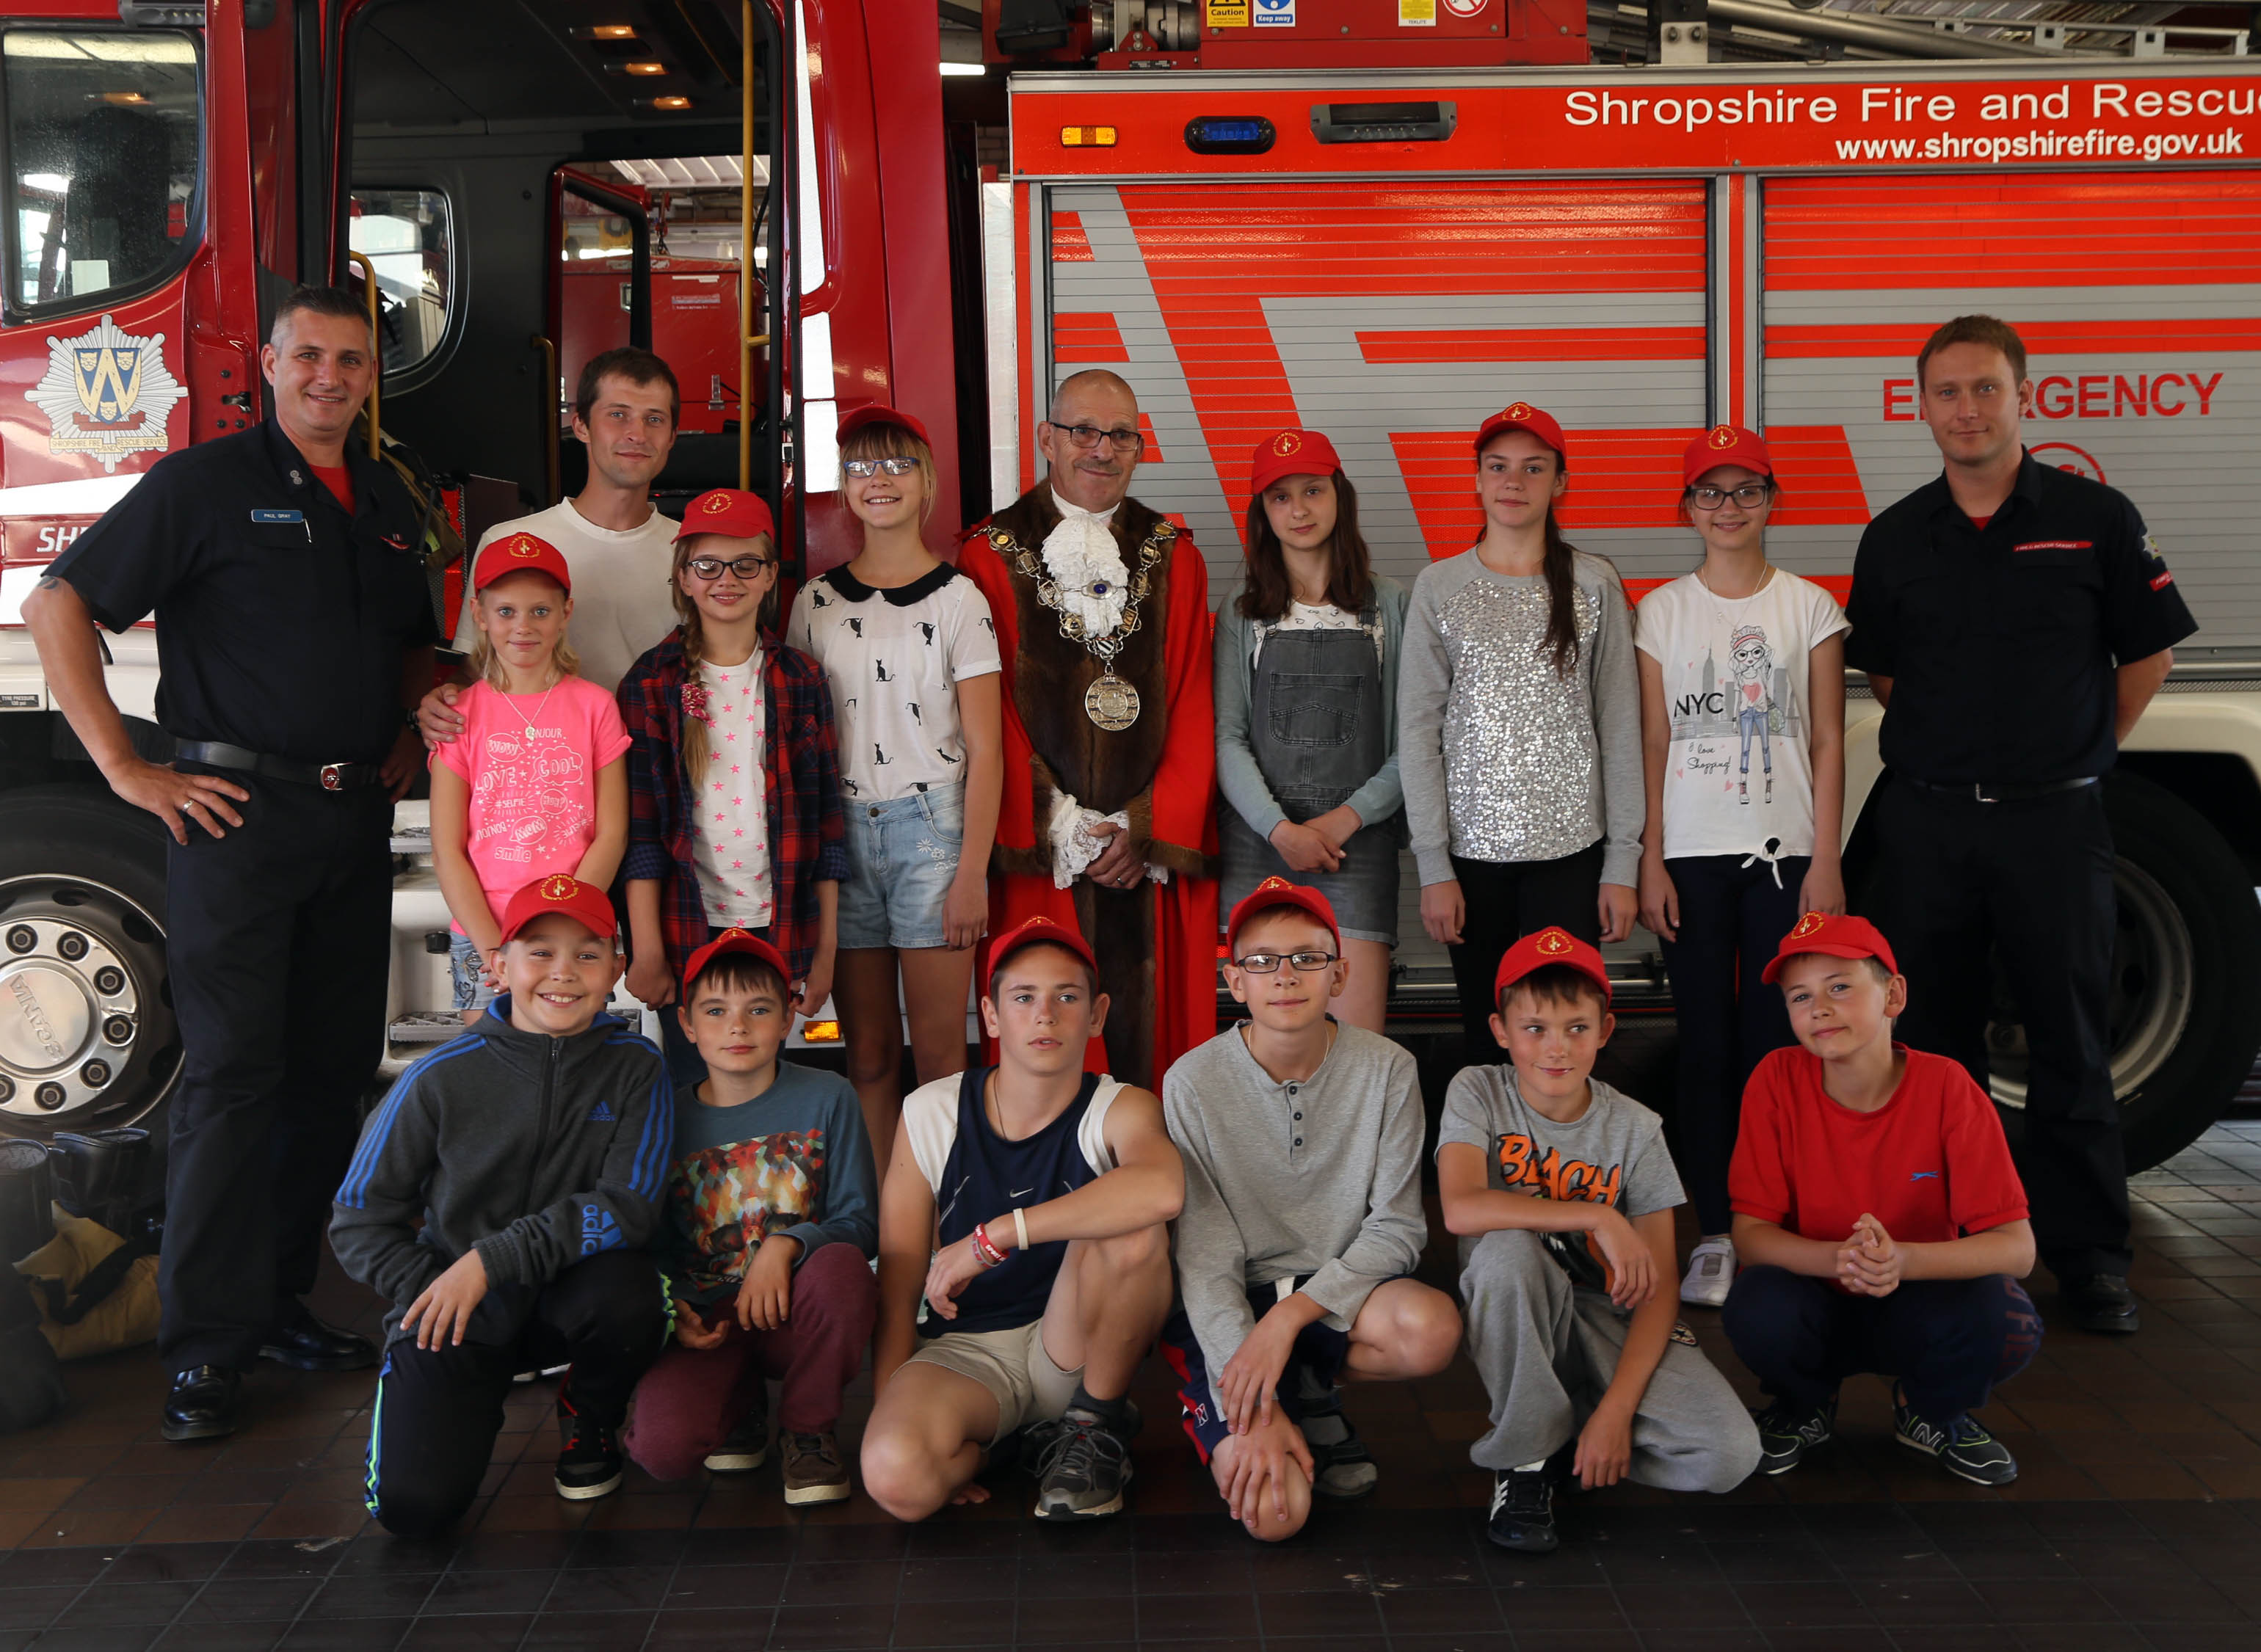 A formal line up in front of a Shropshire Fire and Rescue Service appliance as a memory of the trip to Shrewsbury Fire Station by children from Chernobyl